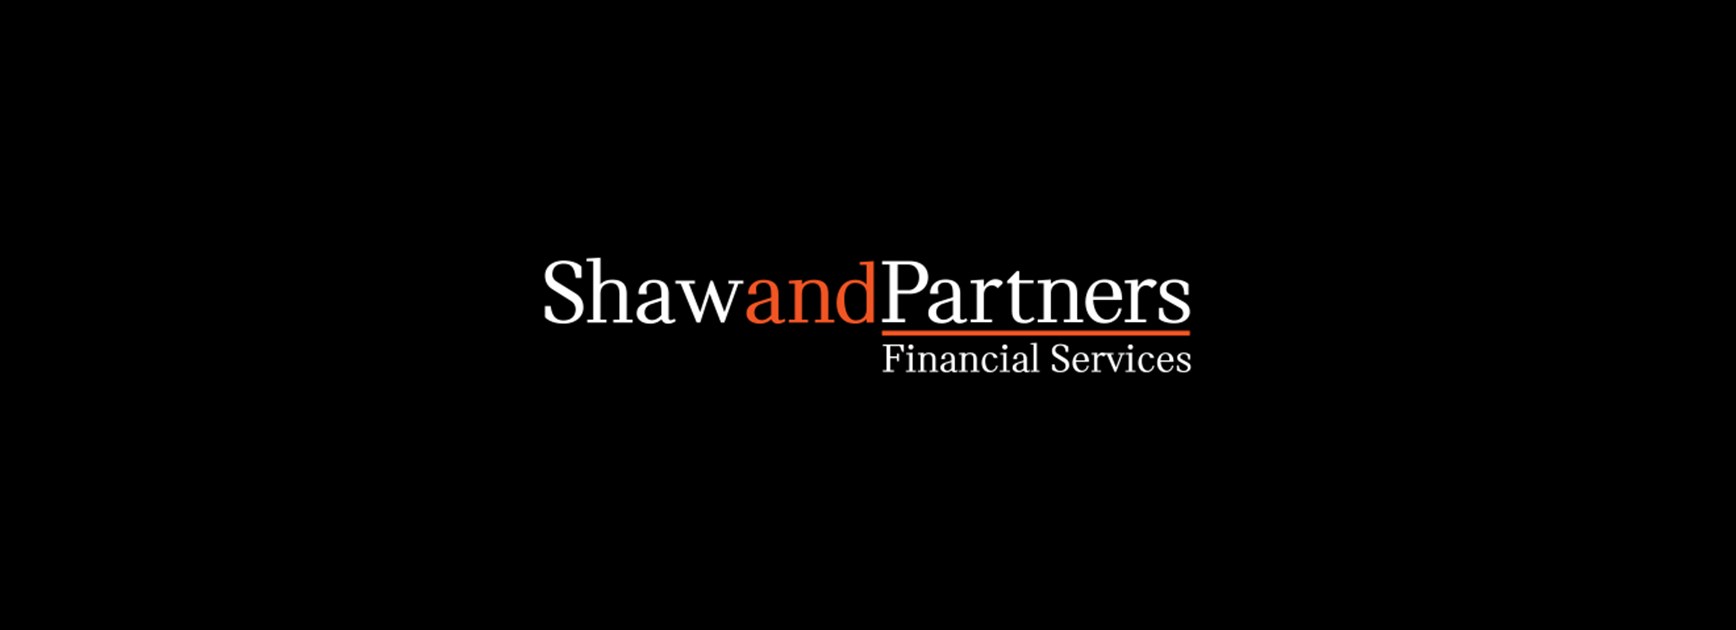 Business Episode 5: Earl Evans (Shaw and Partners)